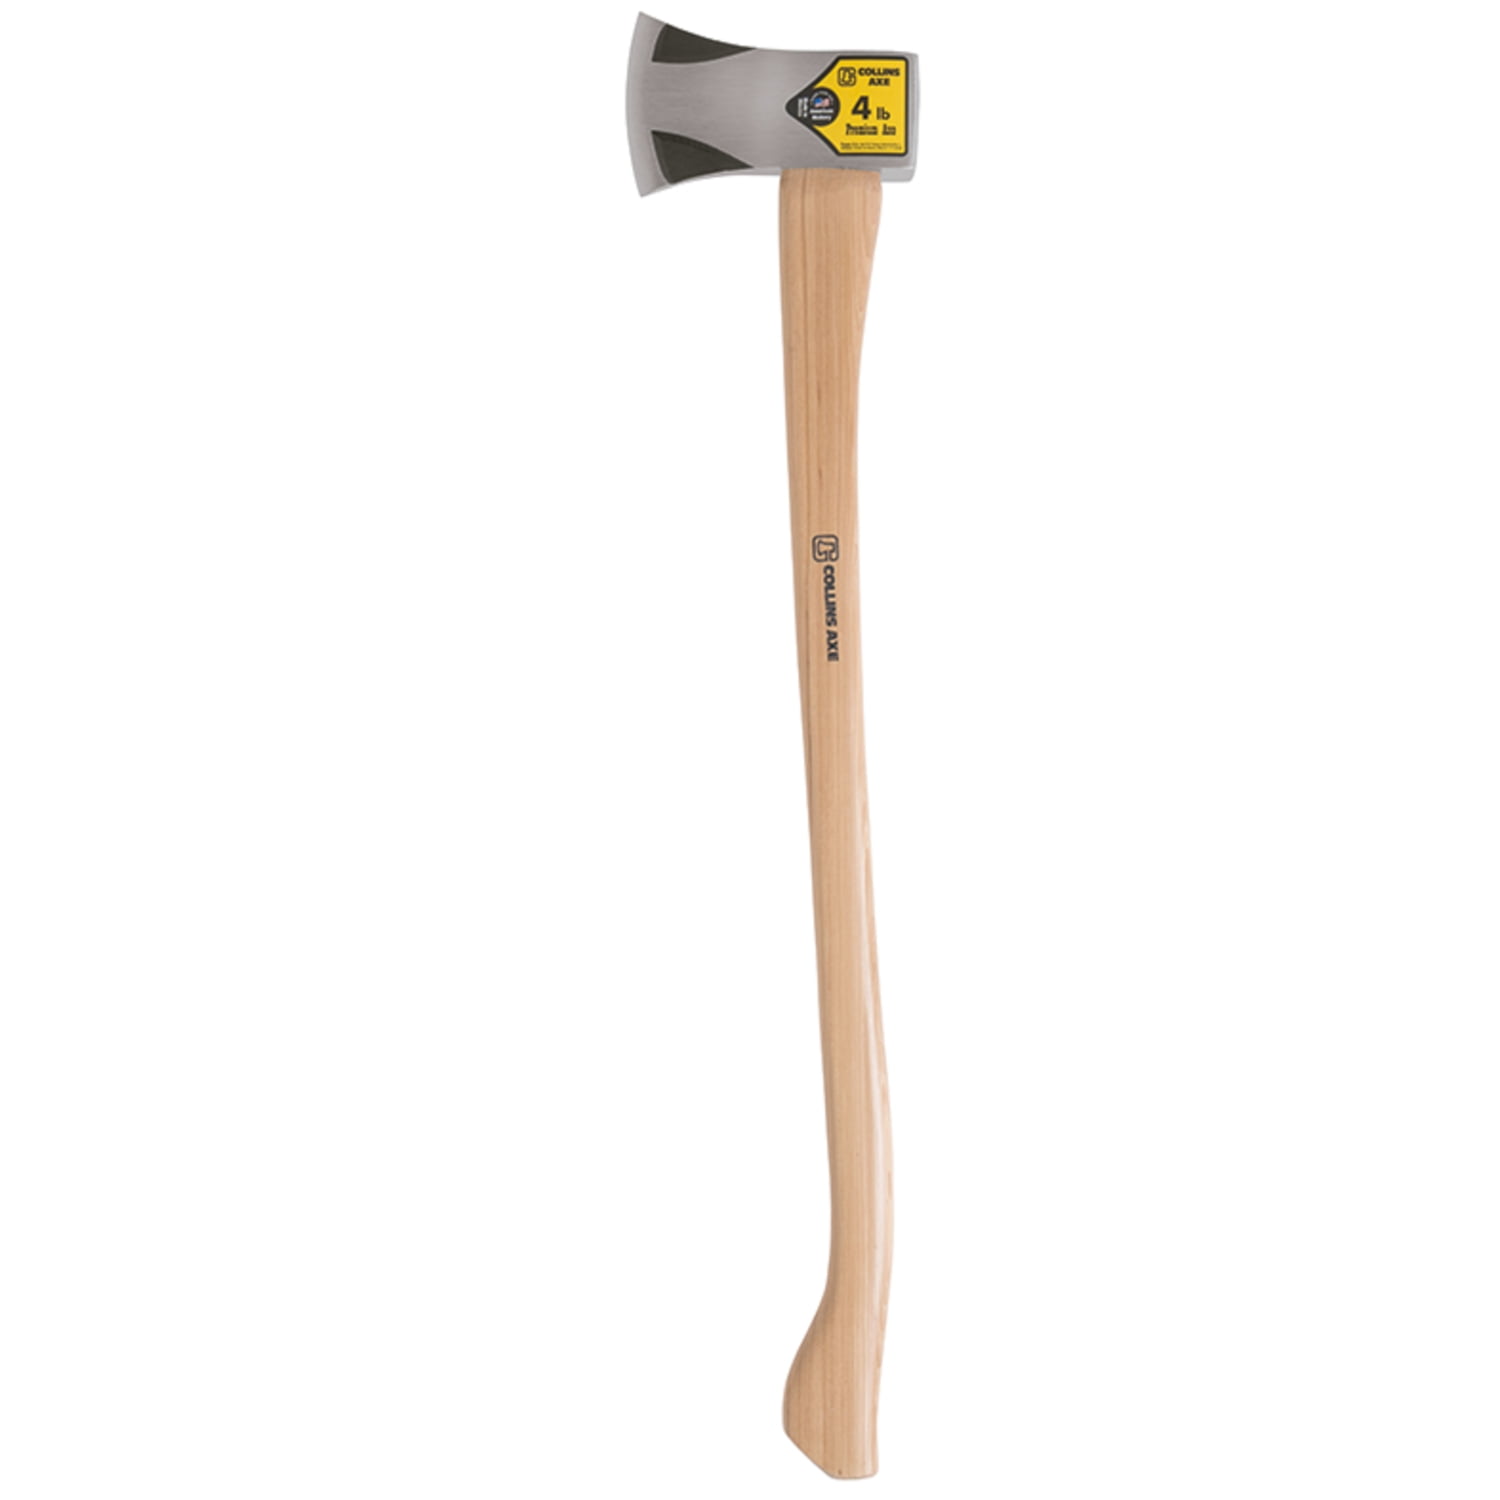 7598543 35 X 4 Lbs Single Bit Hickory Forged Carbon Steel Axe, Assorted